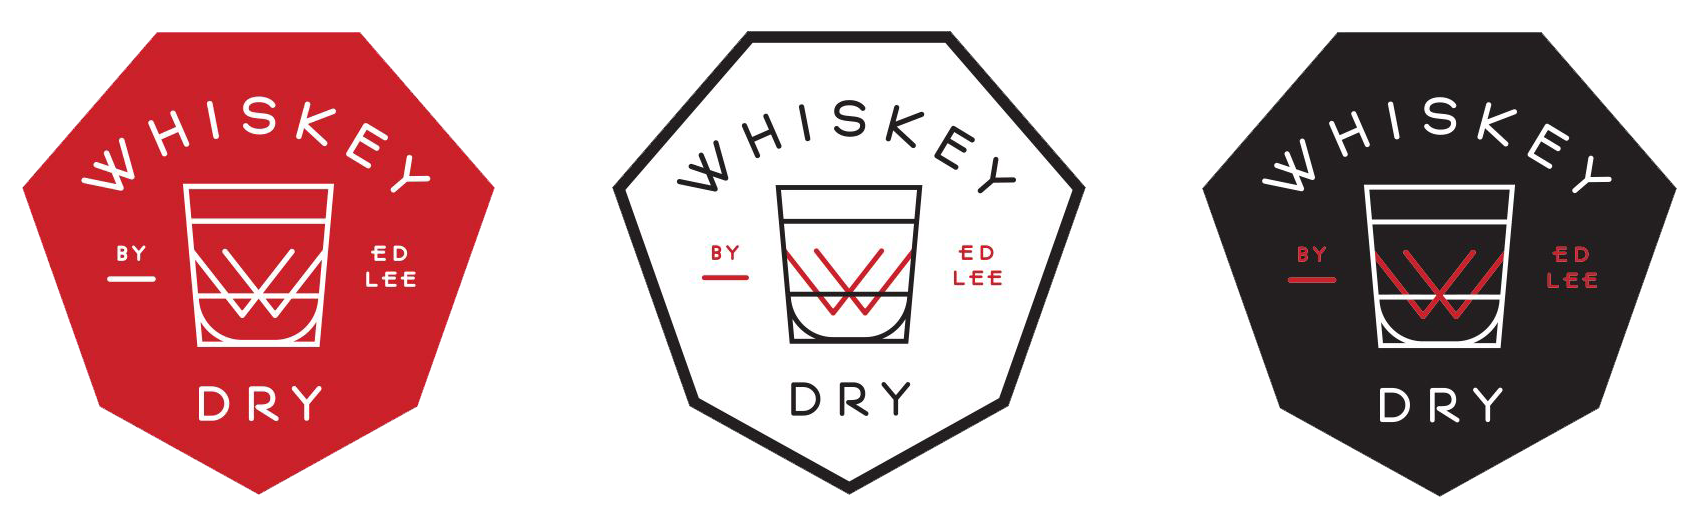 Whiskey Dry logo marks in red, white and black color schemes. 